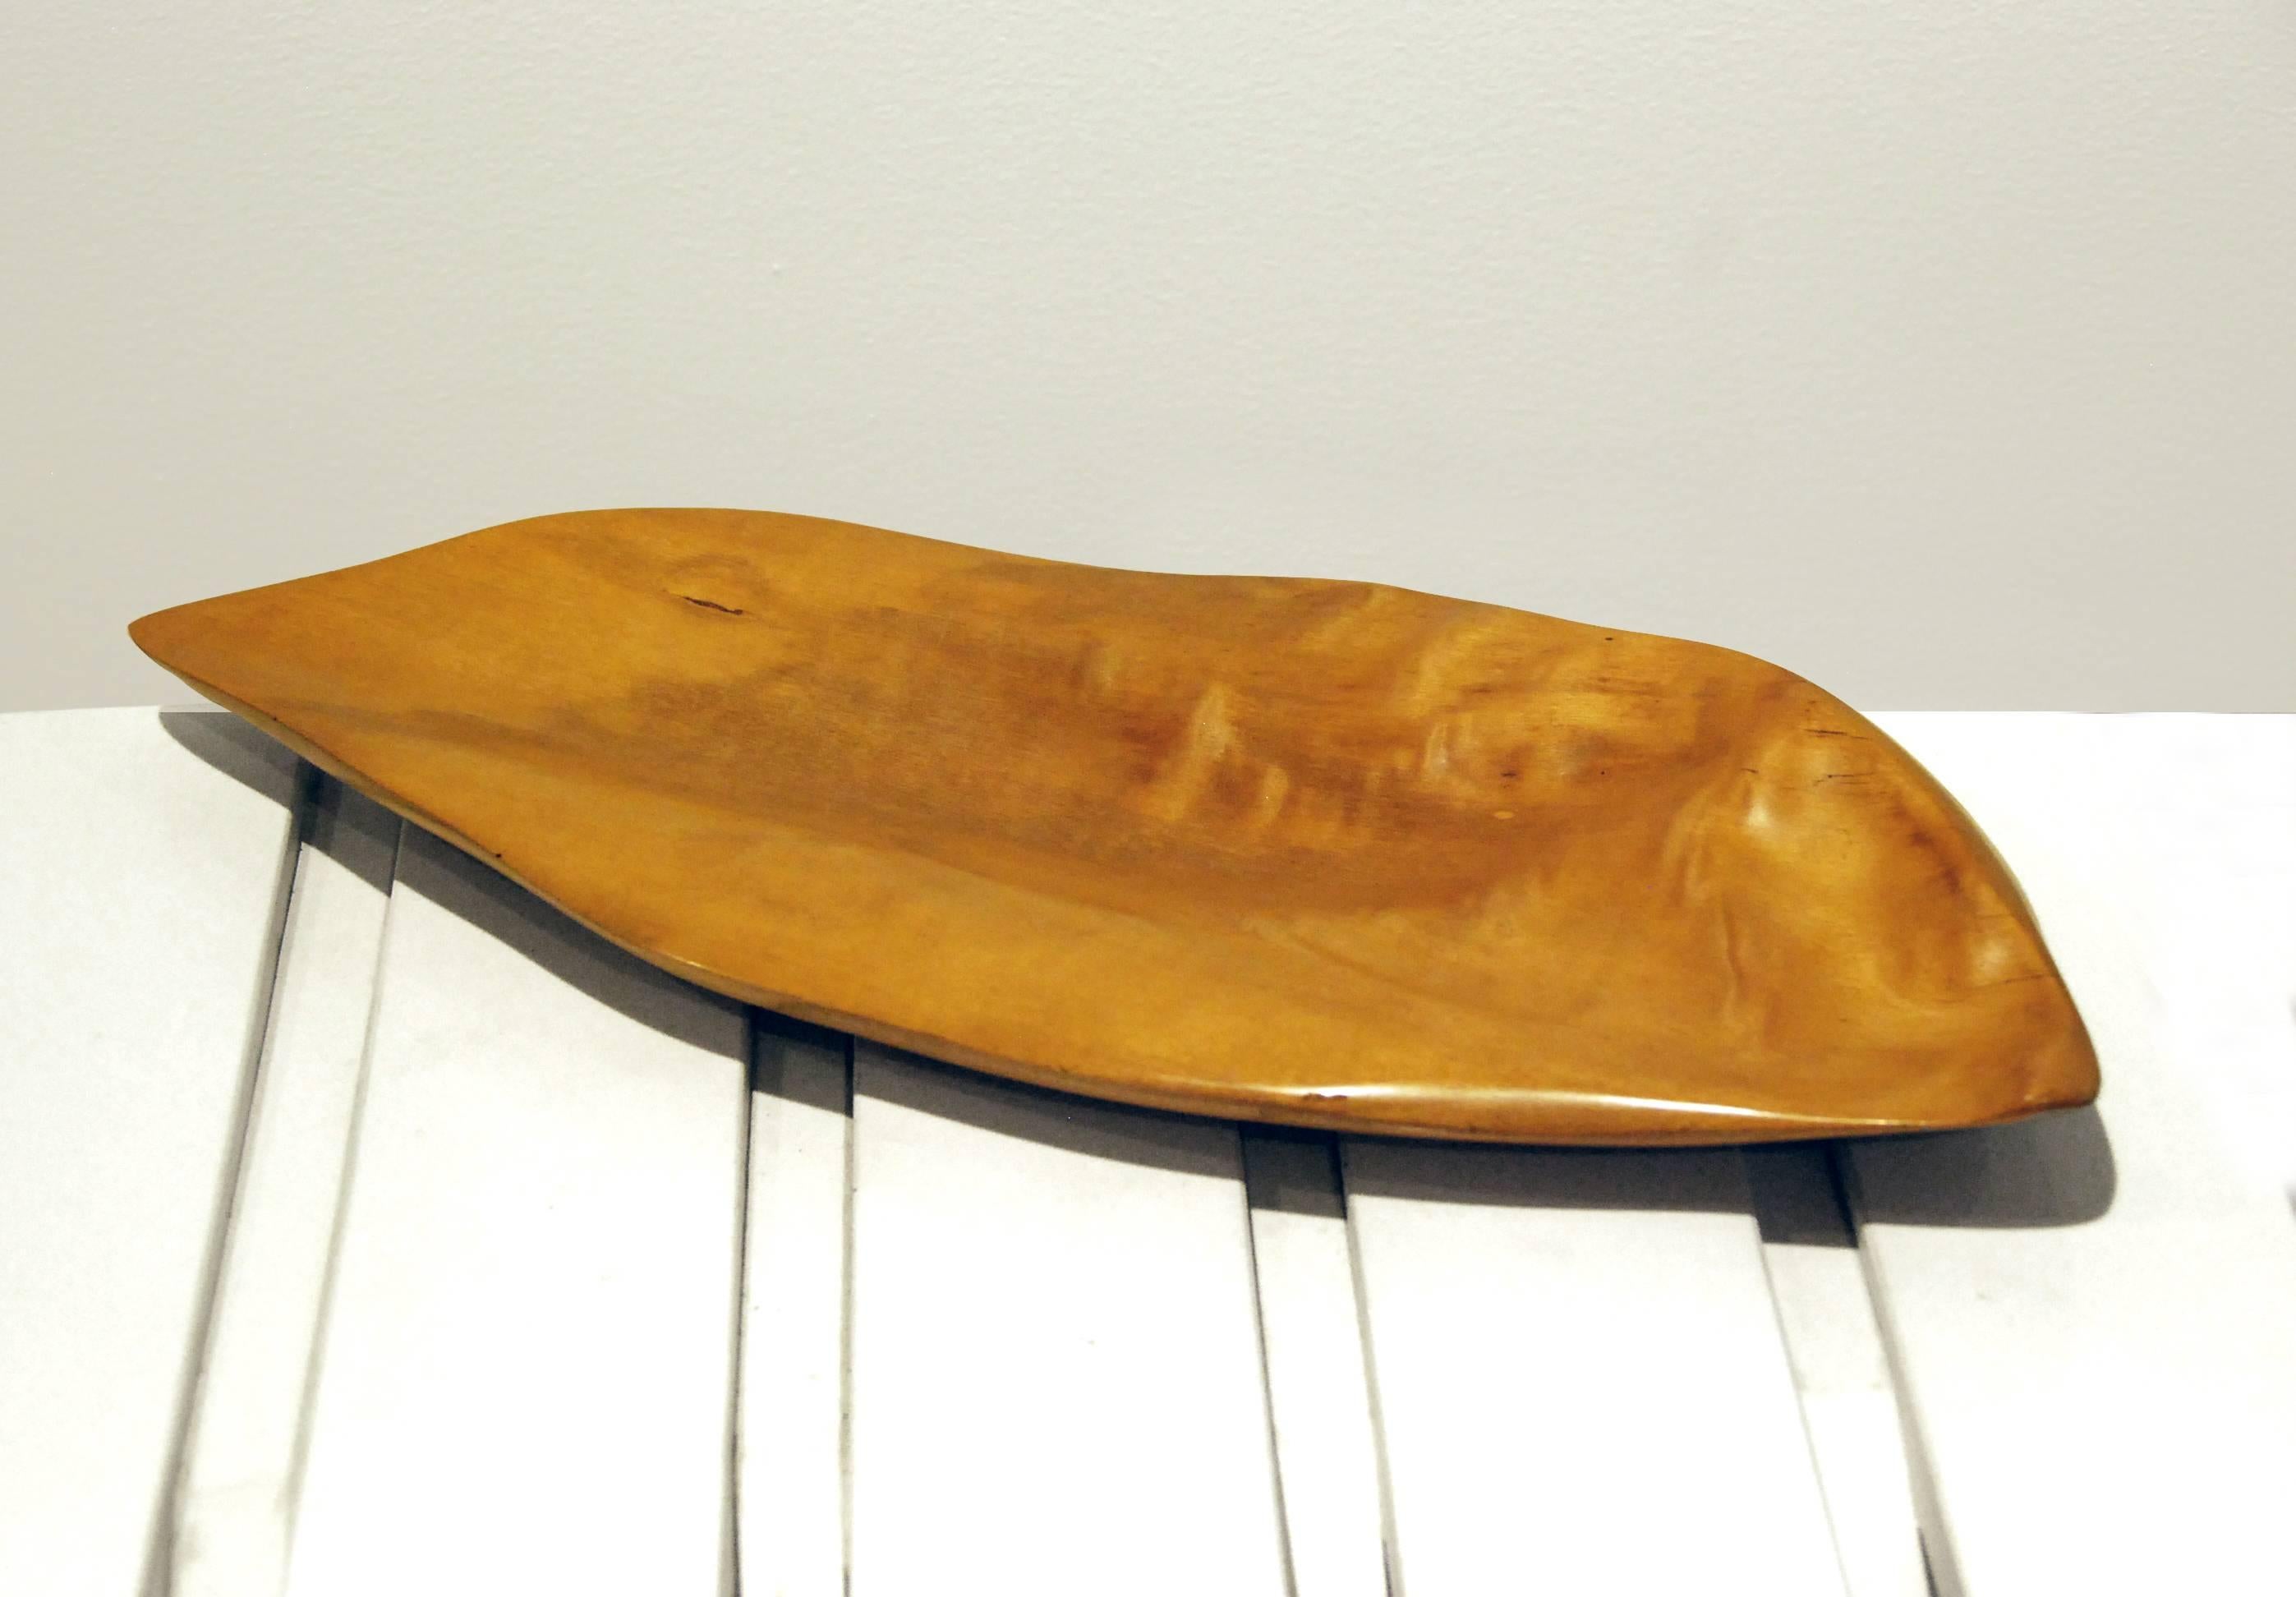 This sculptural tray was made by Alexandre Noll from carved sycamore in 1965. 

French designer Alexandre Noll perceived the creation of furniture to be a true art form. All his objects were handmade and unique artifacts. Noll’s approach to